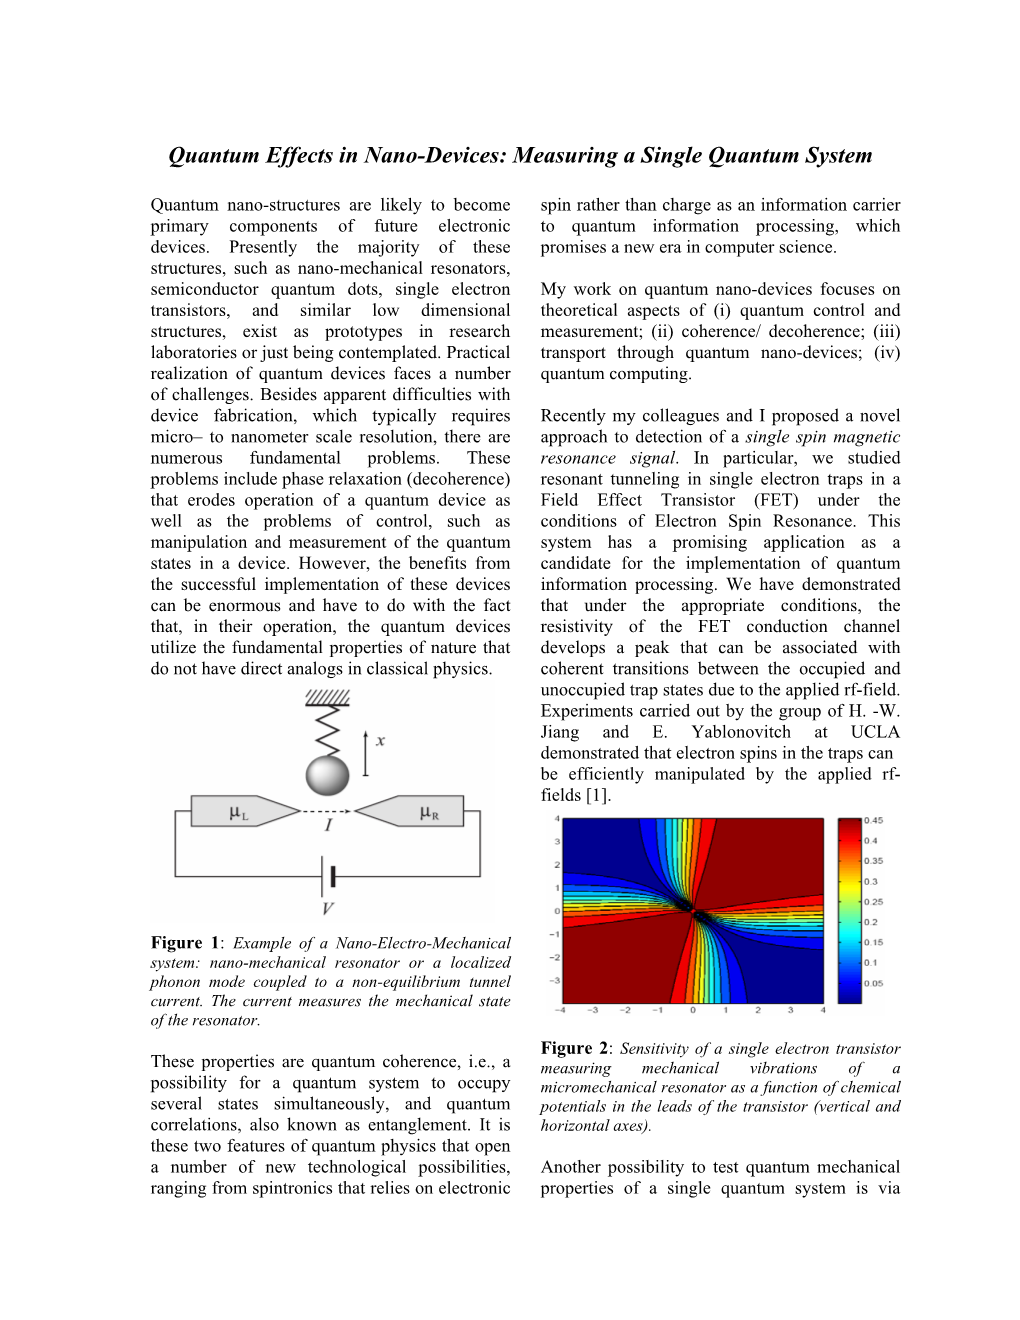 Quantum Effects in Nano-Electro-Mechanical Systems